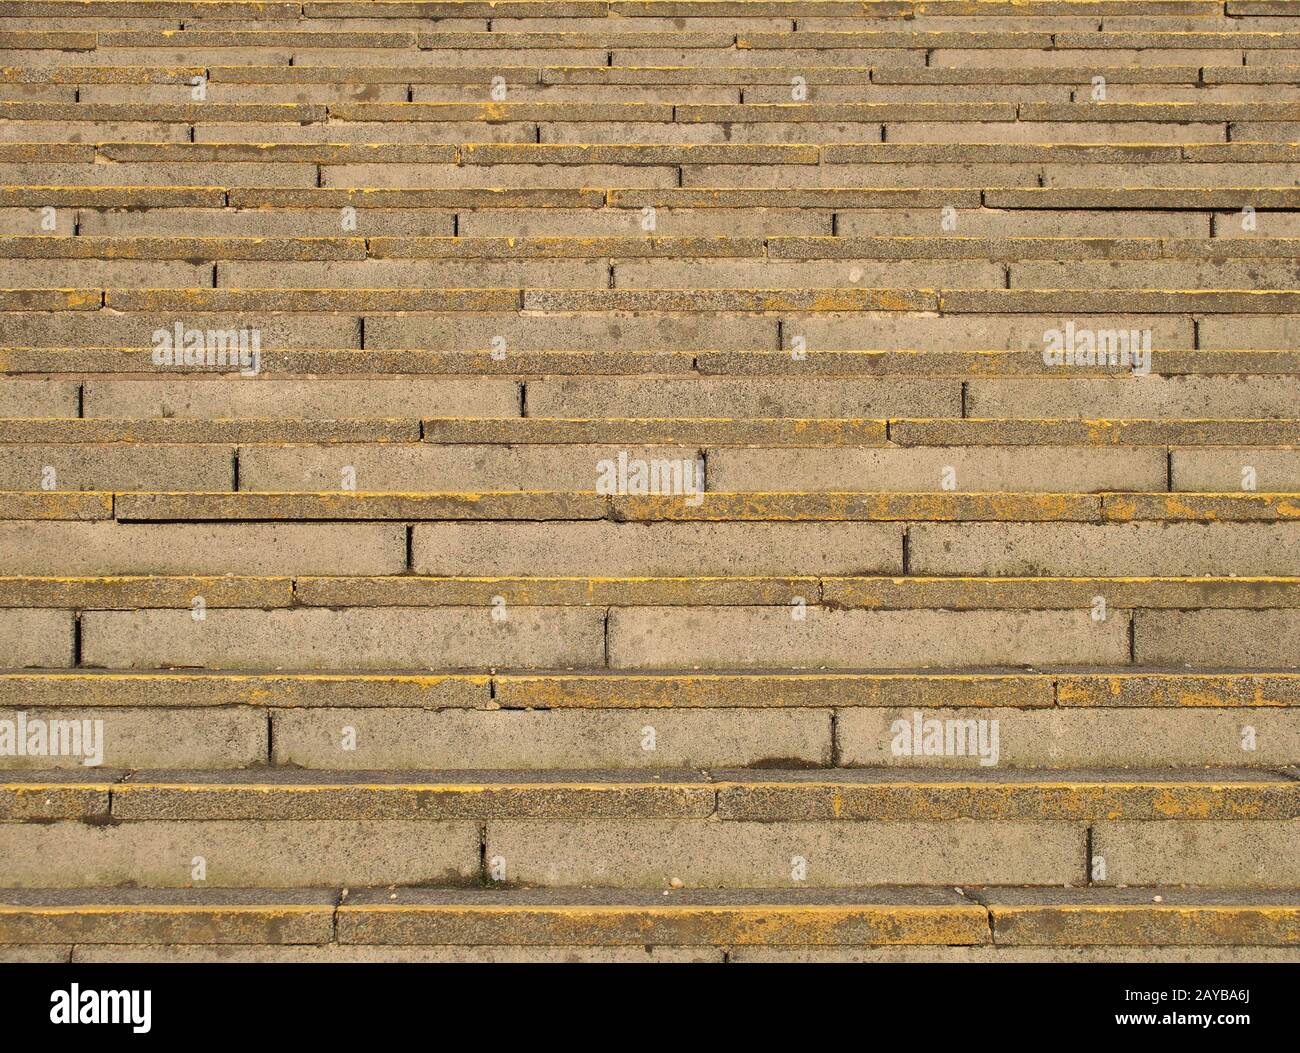 full frame image of old rough concrete stairs with rows of steps in perspective and traces of yellow paint Stock Photo